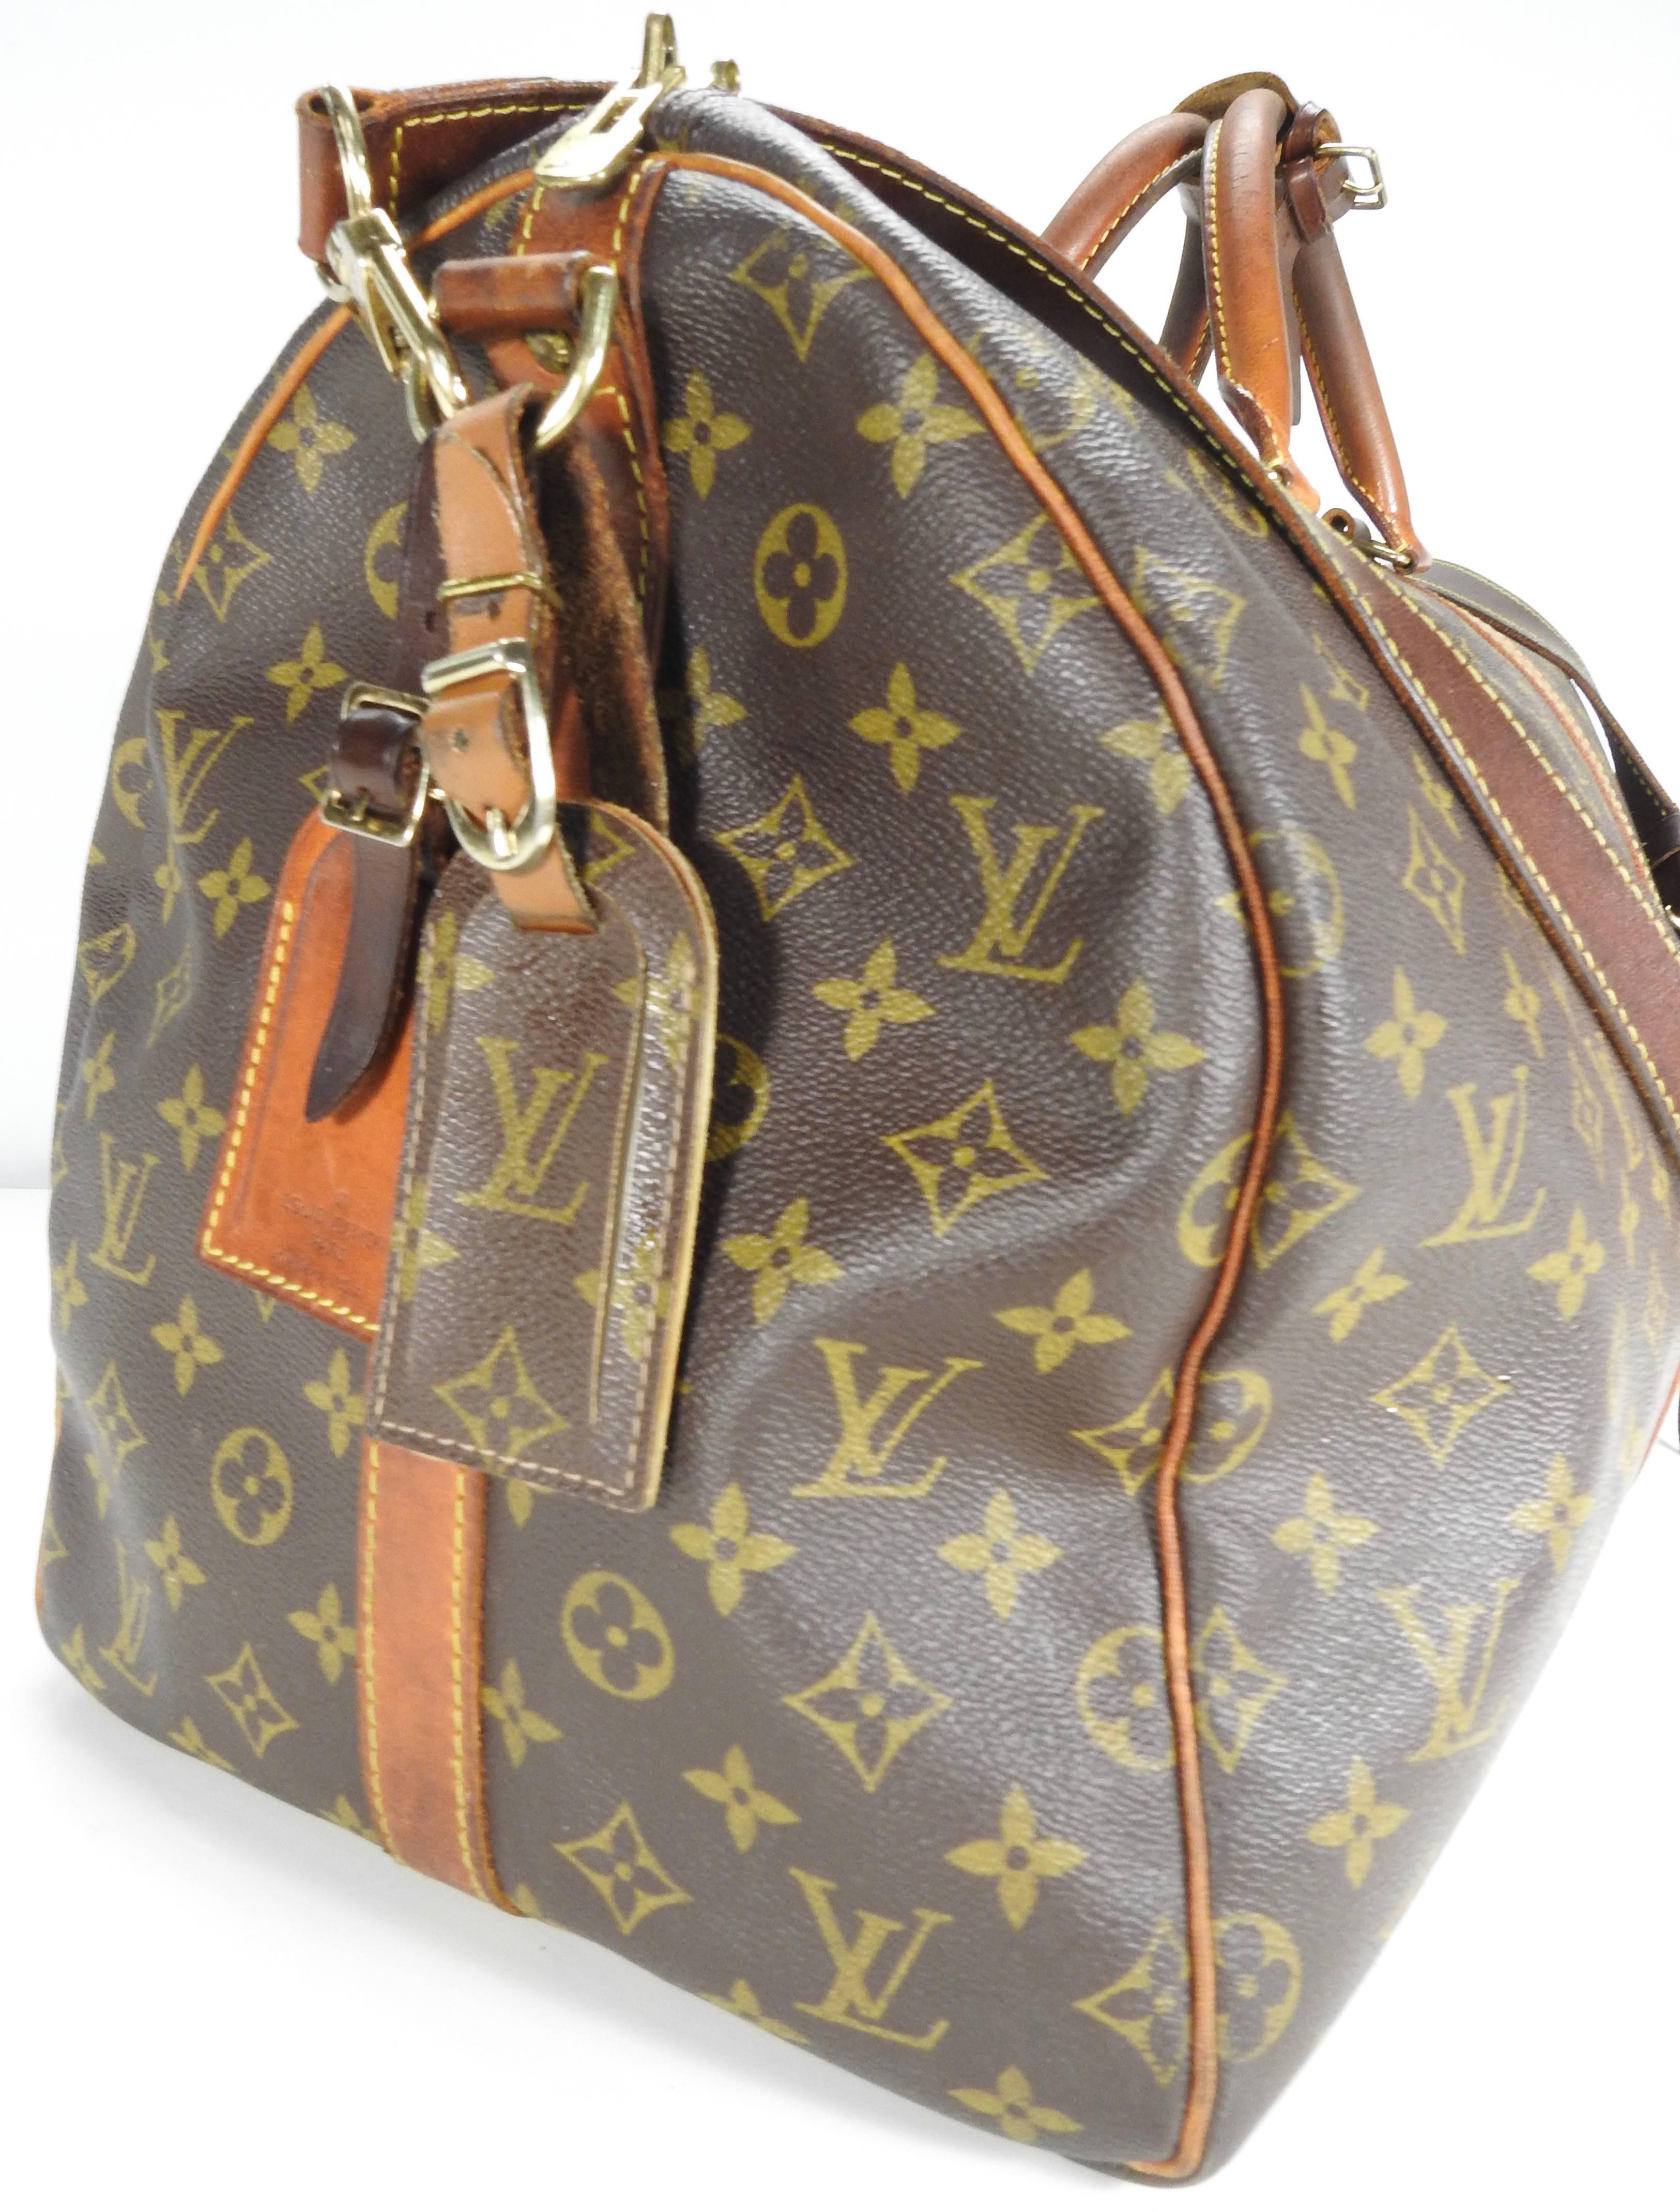 Featured is a Classic Louis Vuitton Keepall leather travel bag with the LV monogram. Top zipper with handles for carrying and a detachable shoulder strap. Two tags are attached. A leather strap with a buckle is included to attach the pair of carry